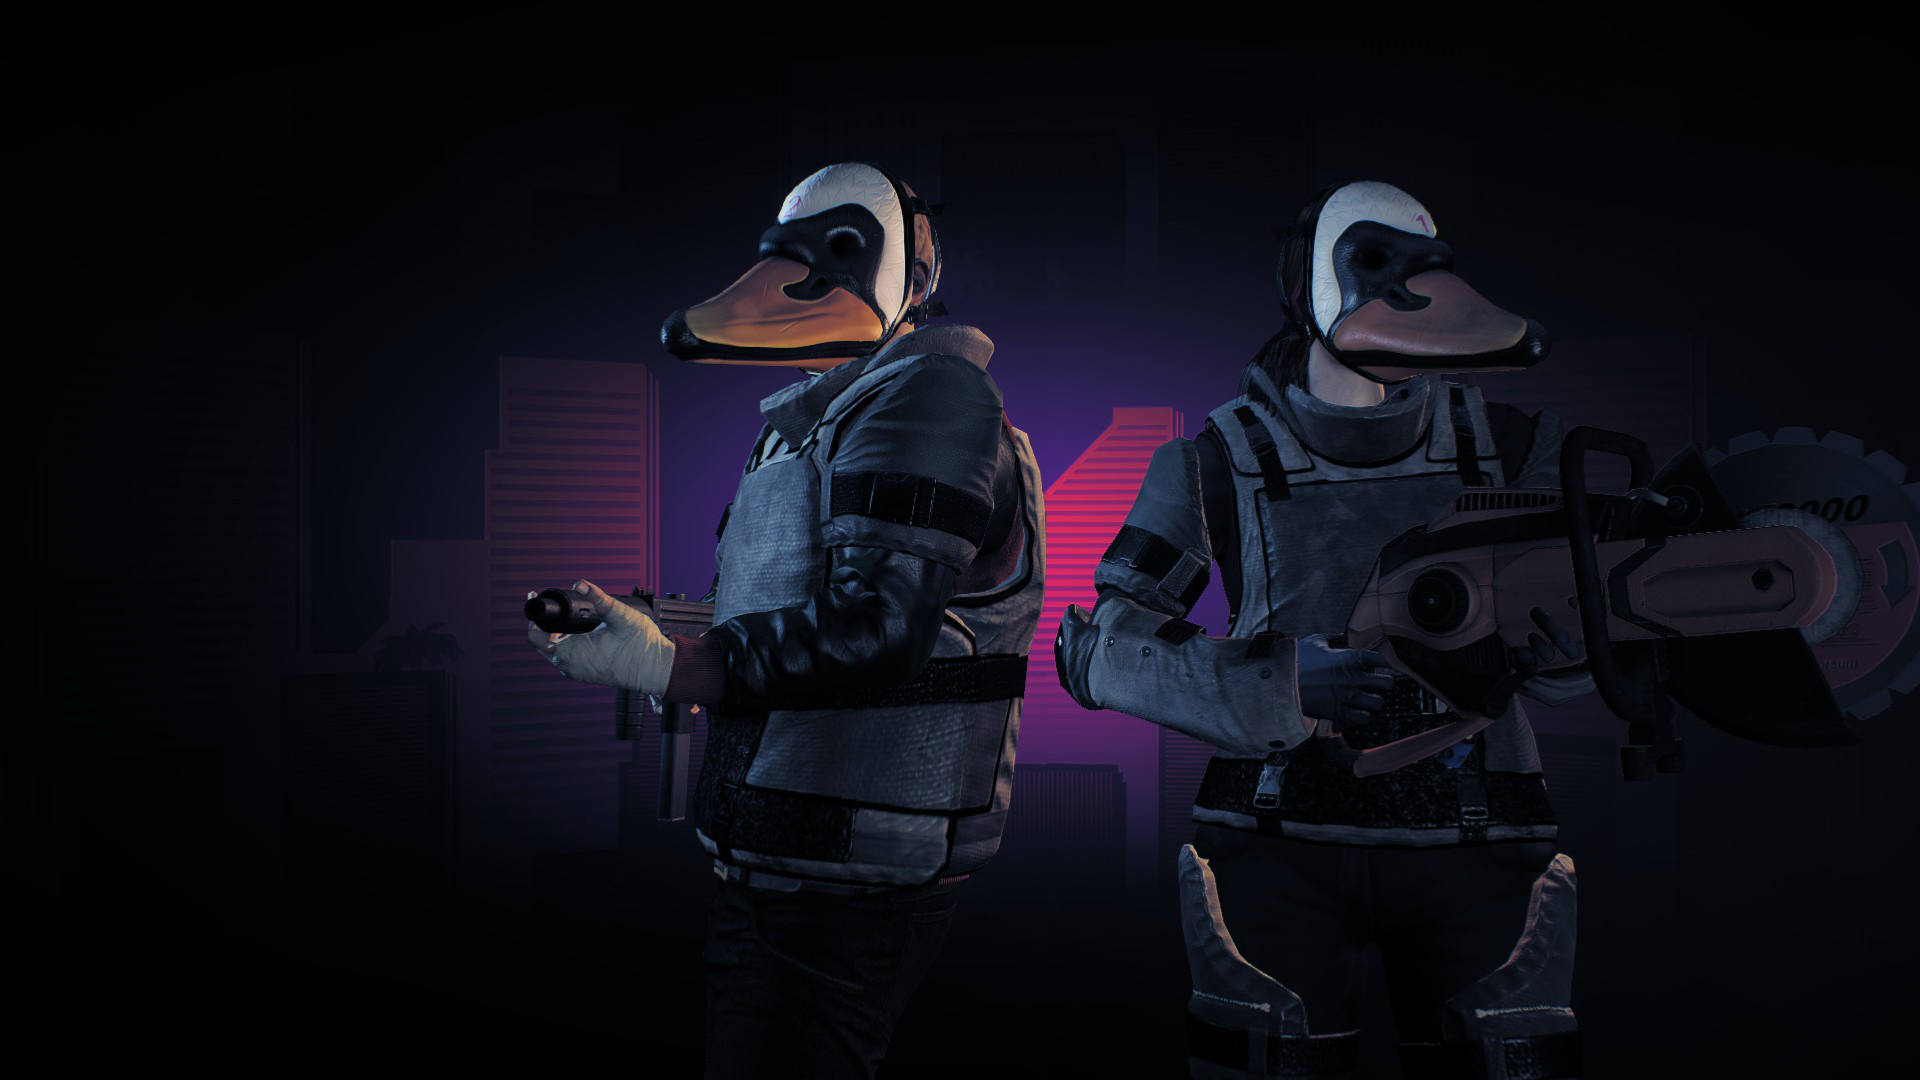 Jacket from payday 2 фото 83